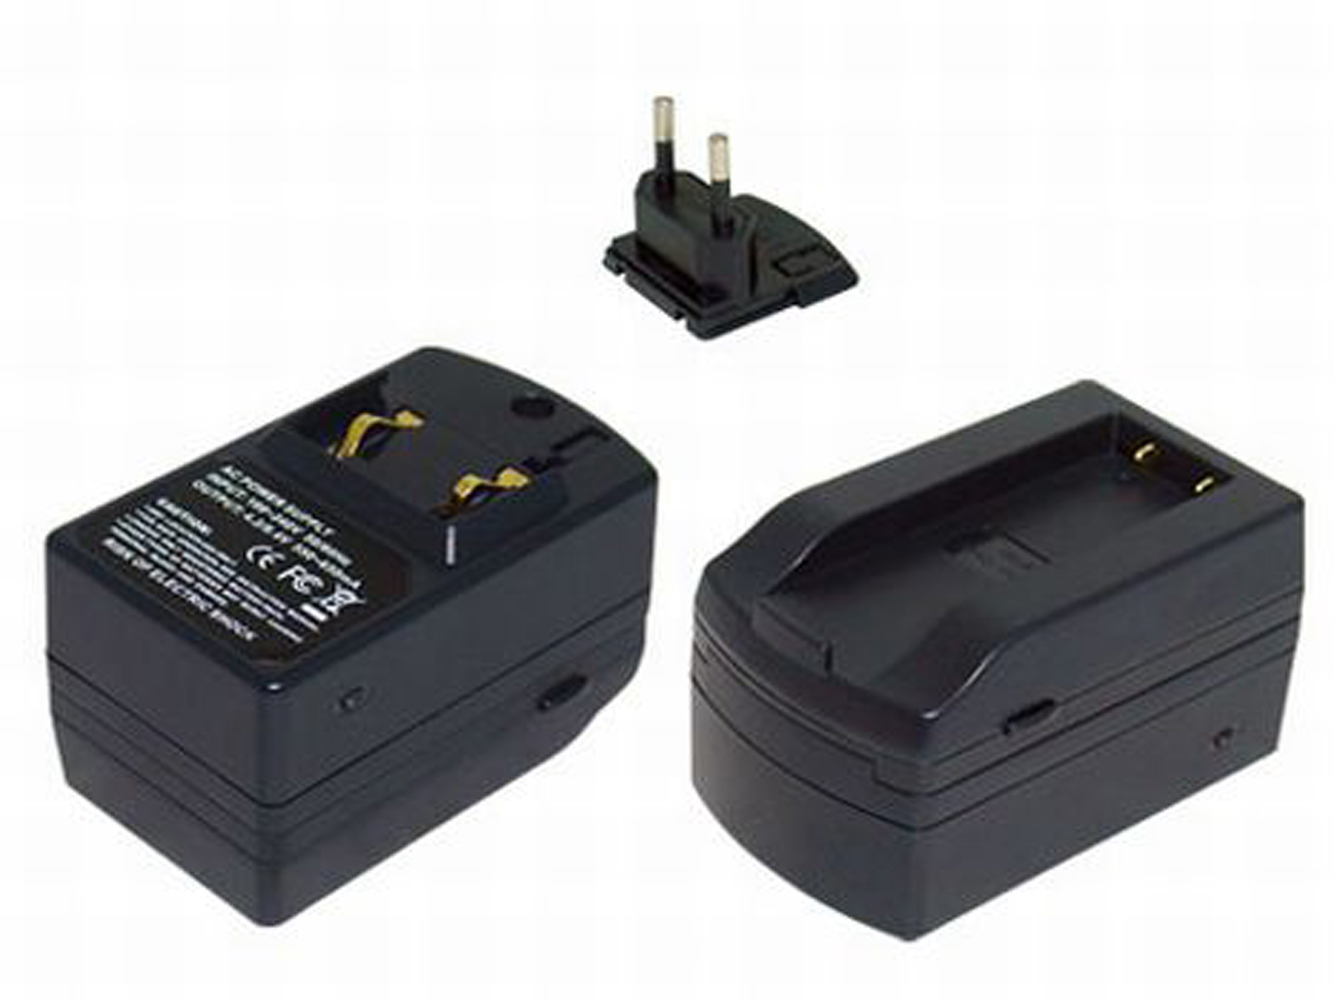 Casio Np-50, Np-50dba Battery Chargers For Exilim Hi-zoom Ex-v7, Exilim Hi-zoom Ex-v7sr replacement